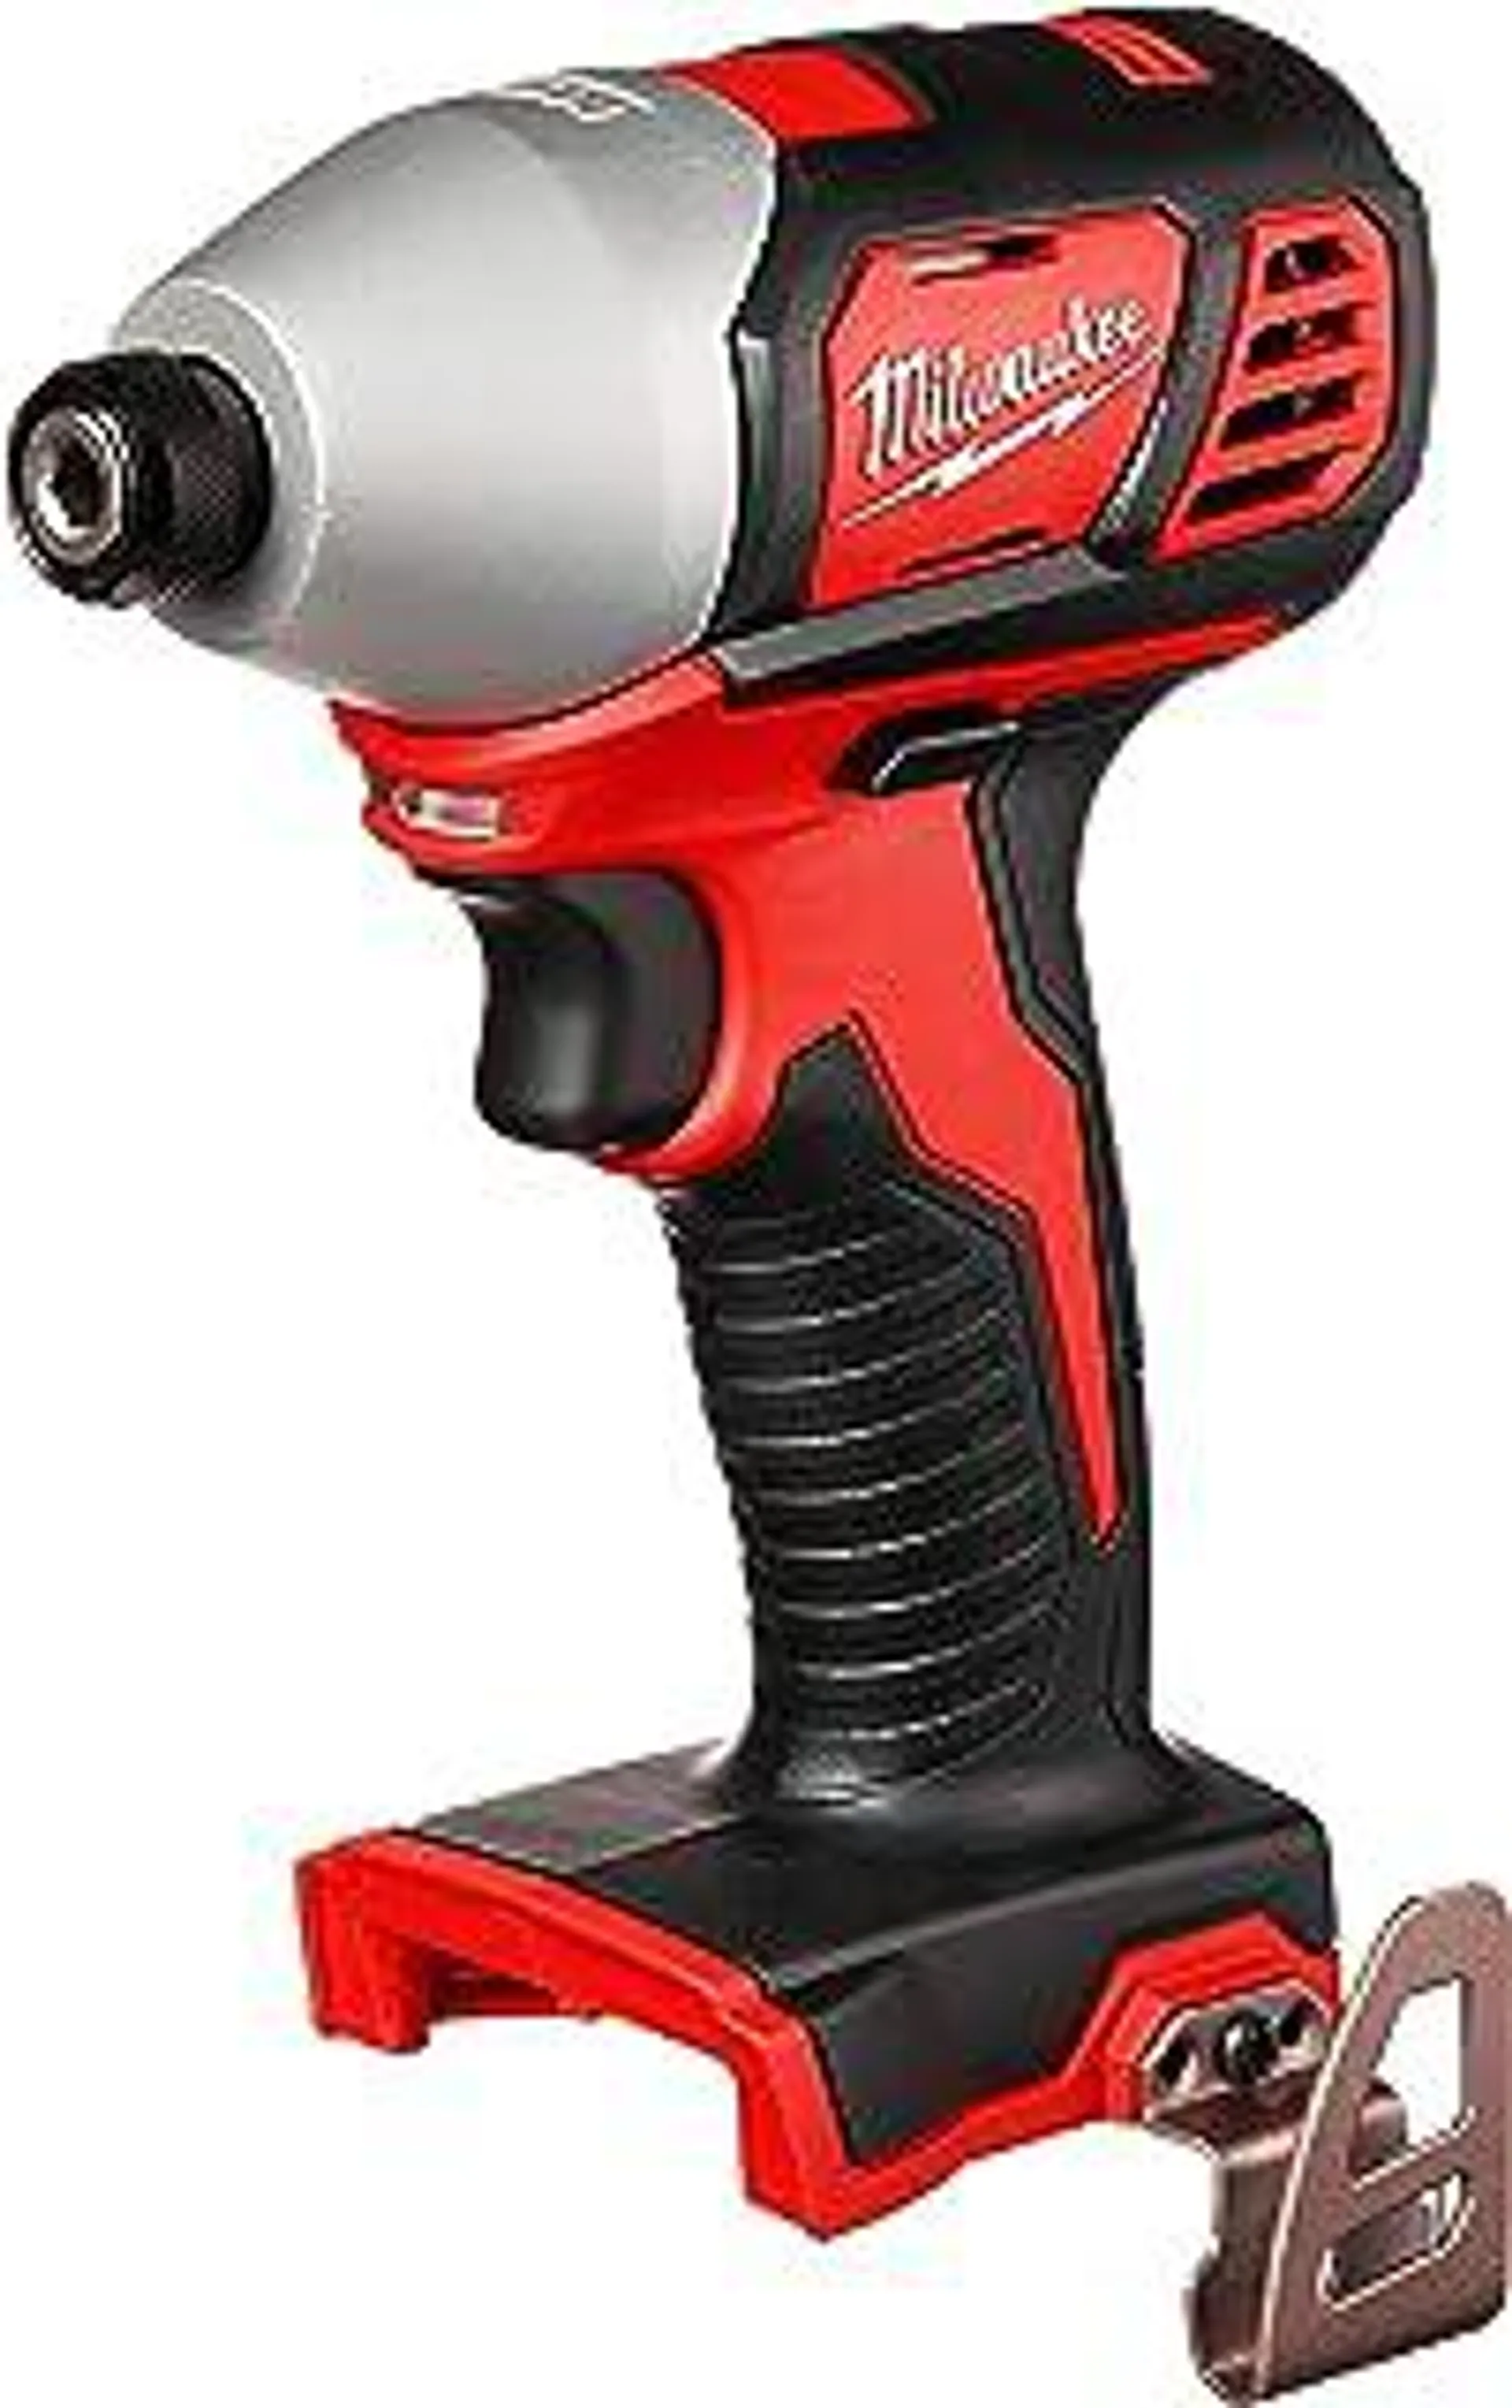 2656-20 M18 18V 1/4 Inch Lithium Ion Hex Impact Driver with 1,500 Inch Pounds of Torque and LED Lighting Array (Battery Not Included, Power Tool Only)